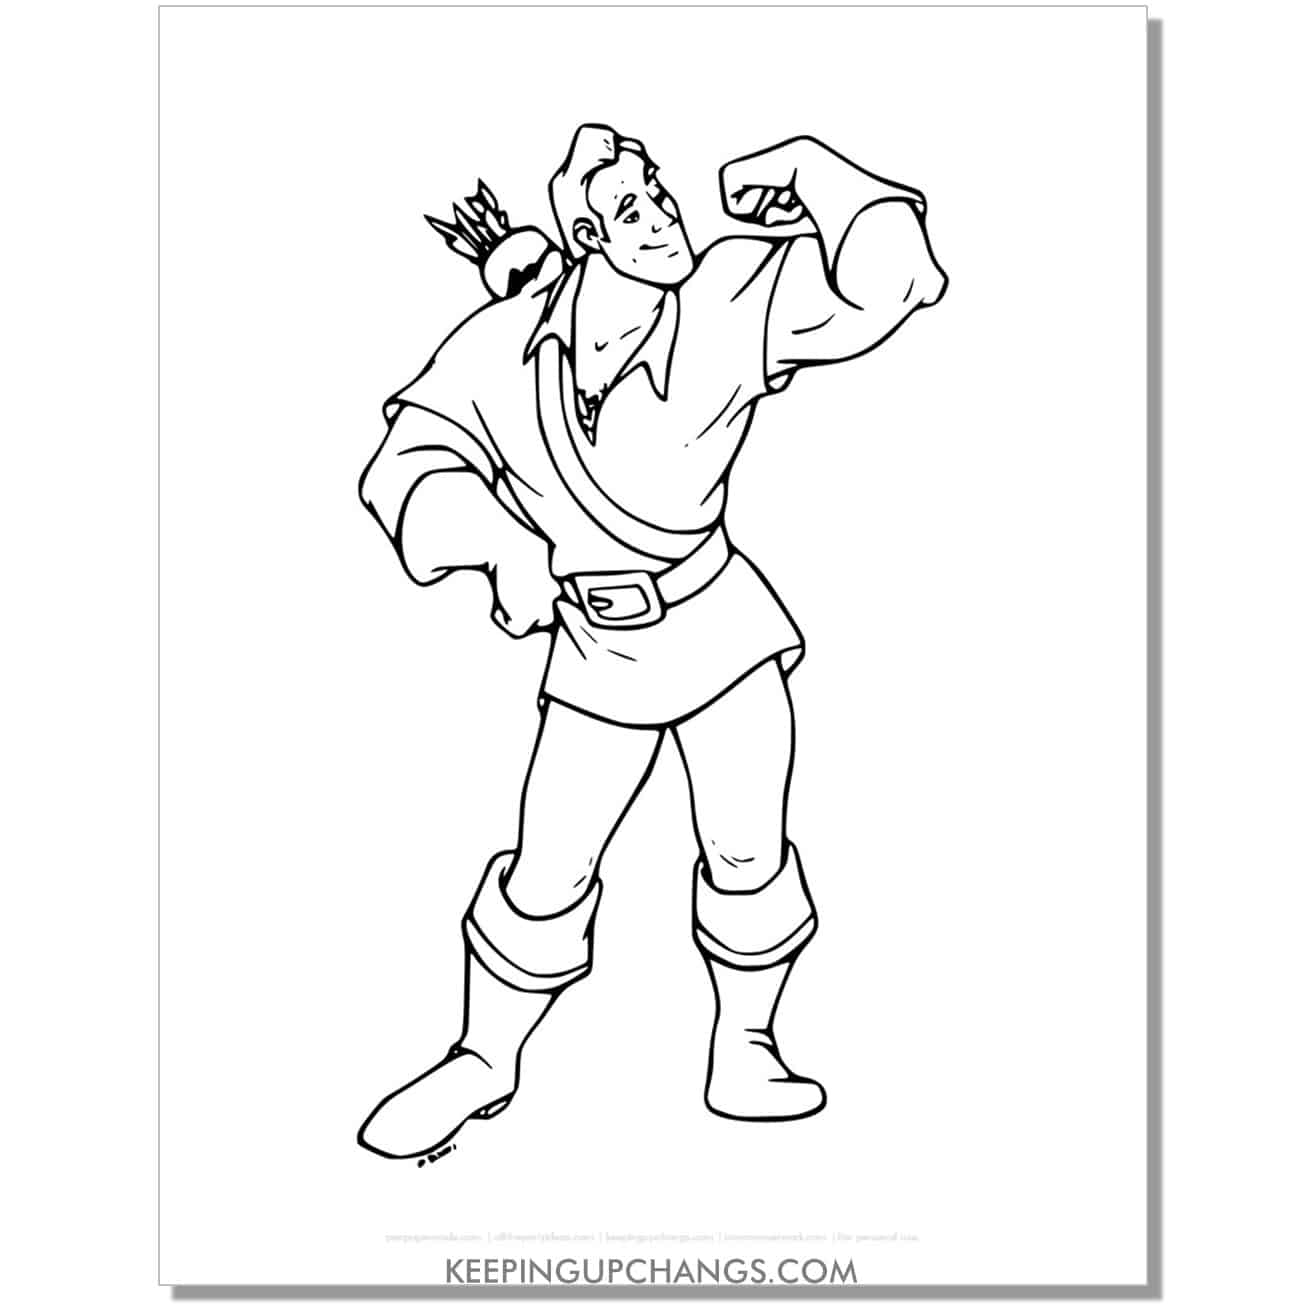 beauty and beast gaston flexing muscles coloring page, sheet.